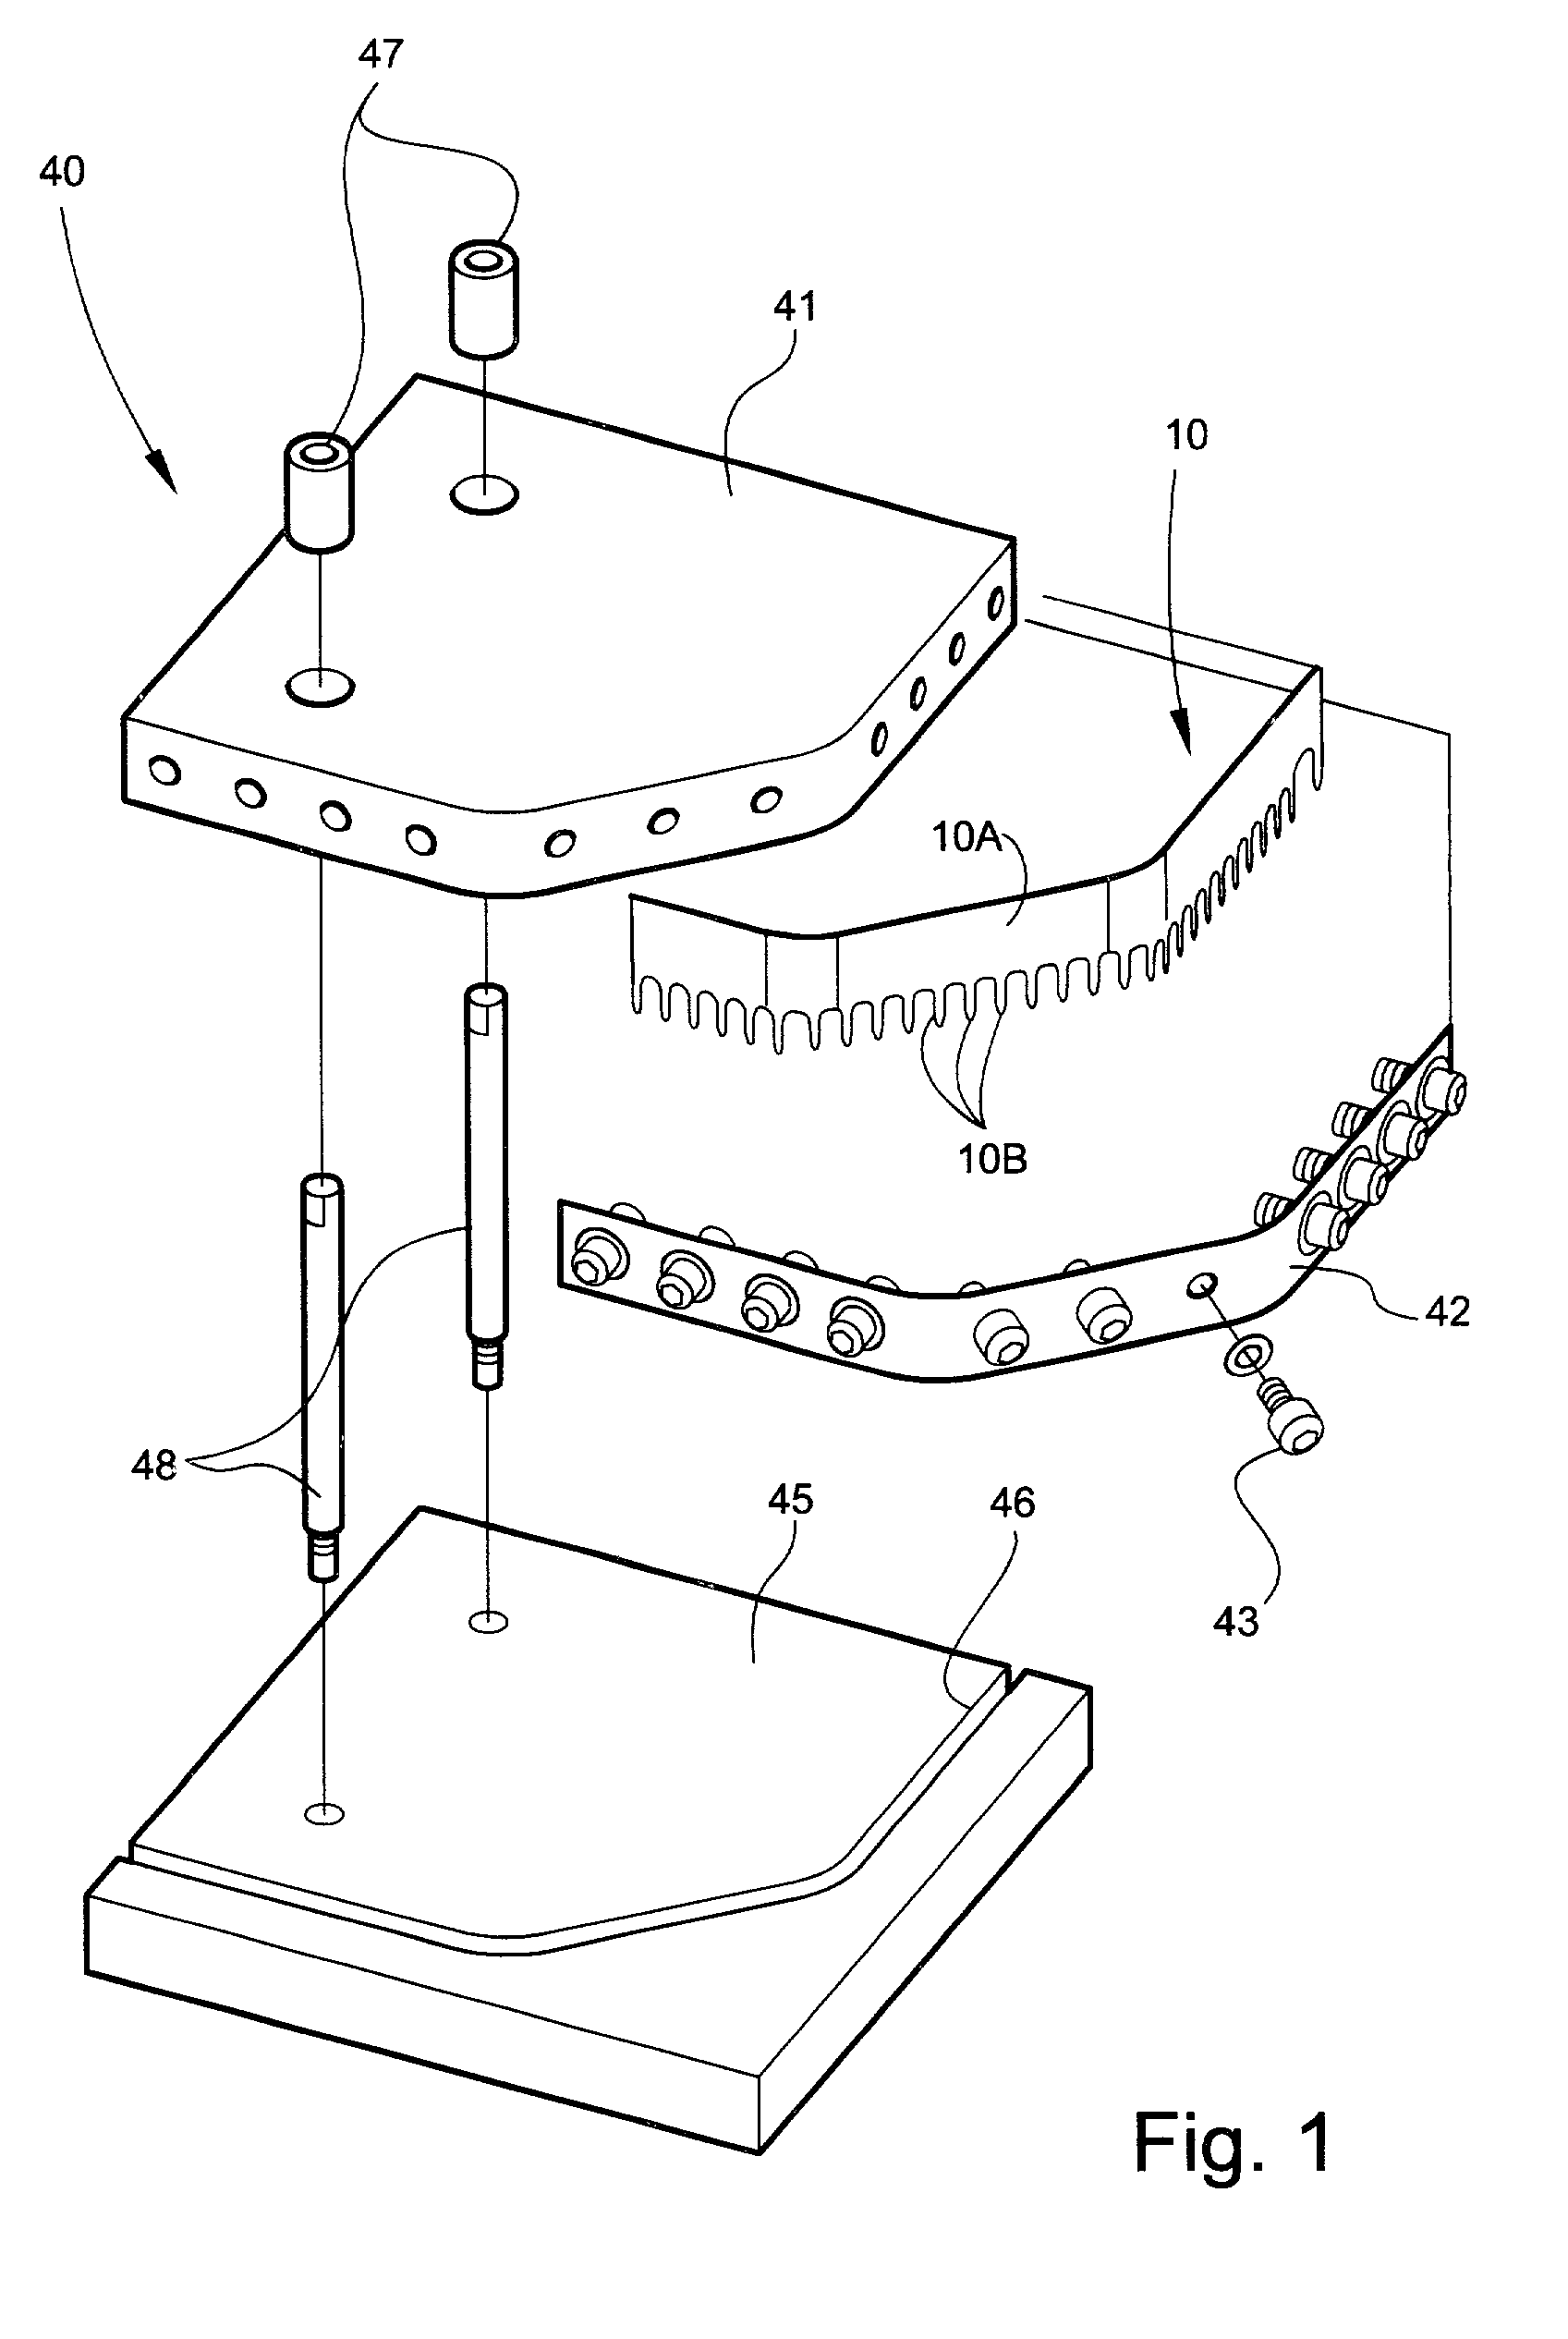 Perforation blade for forming a burst-resistant easy-open corner in a heavy duty bag